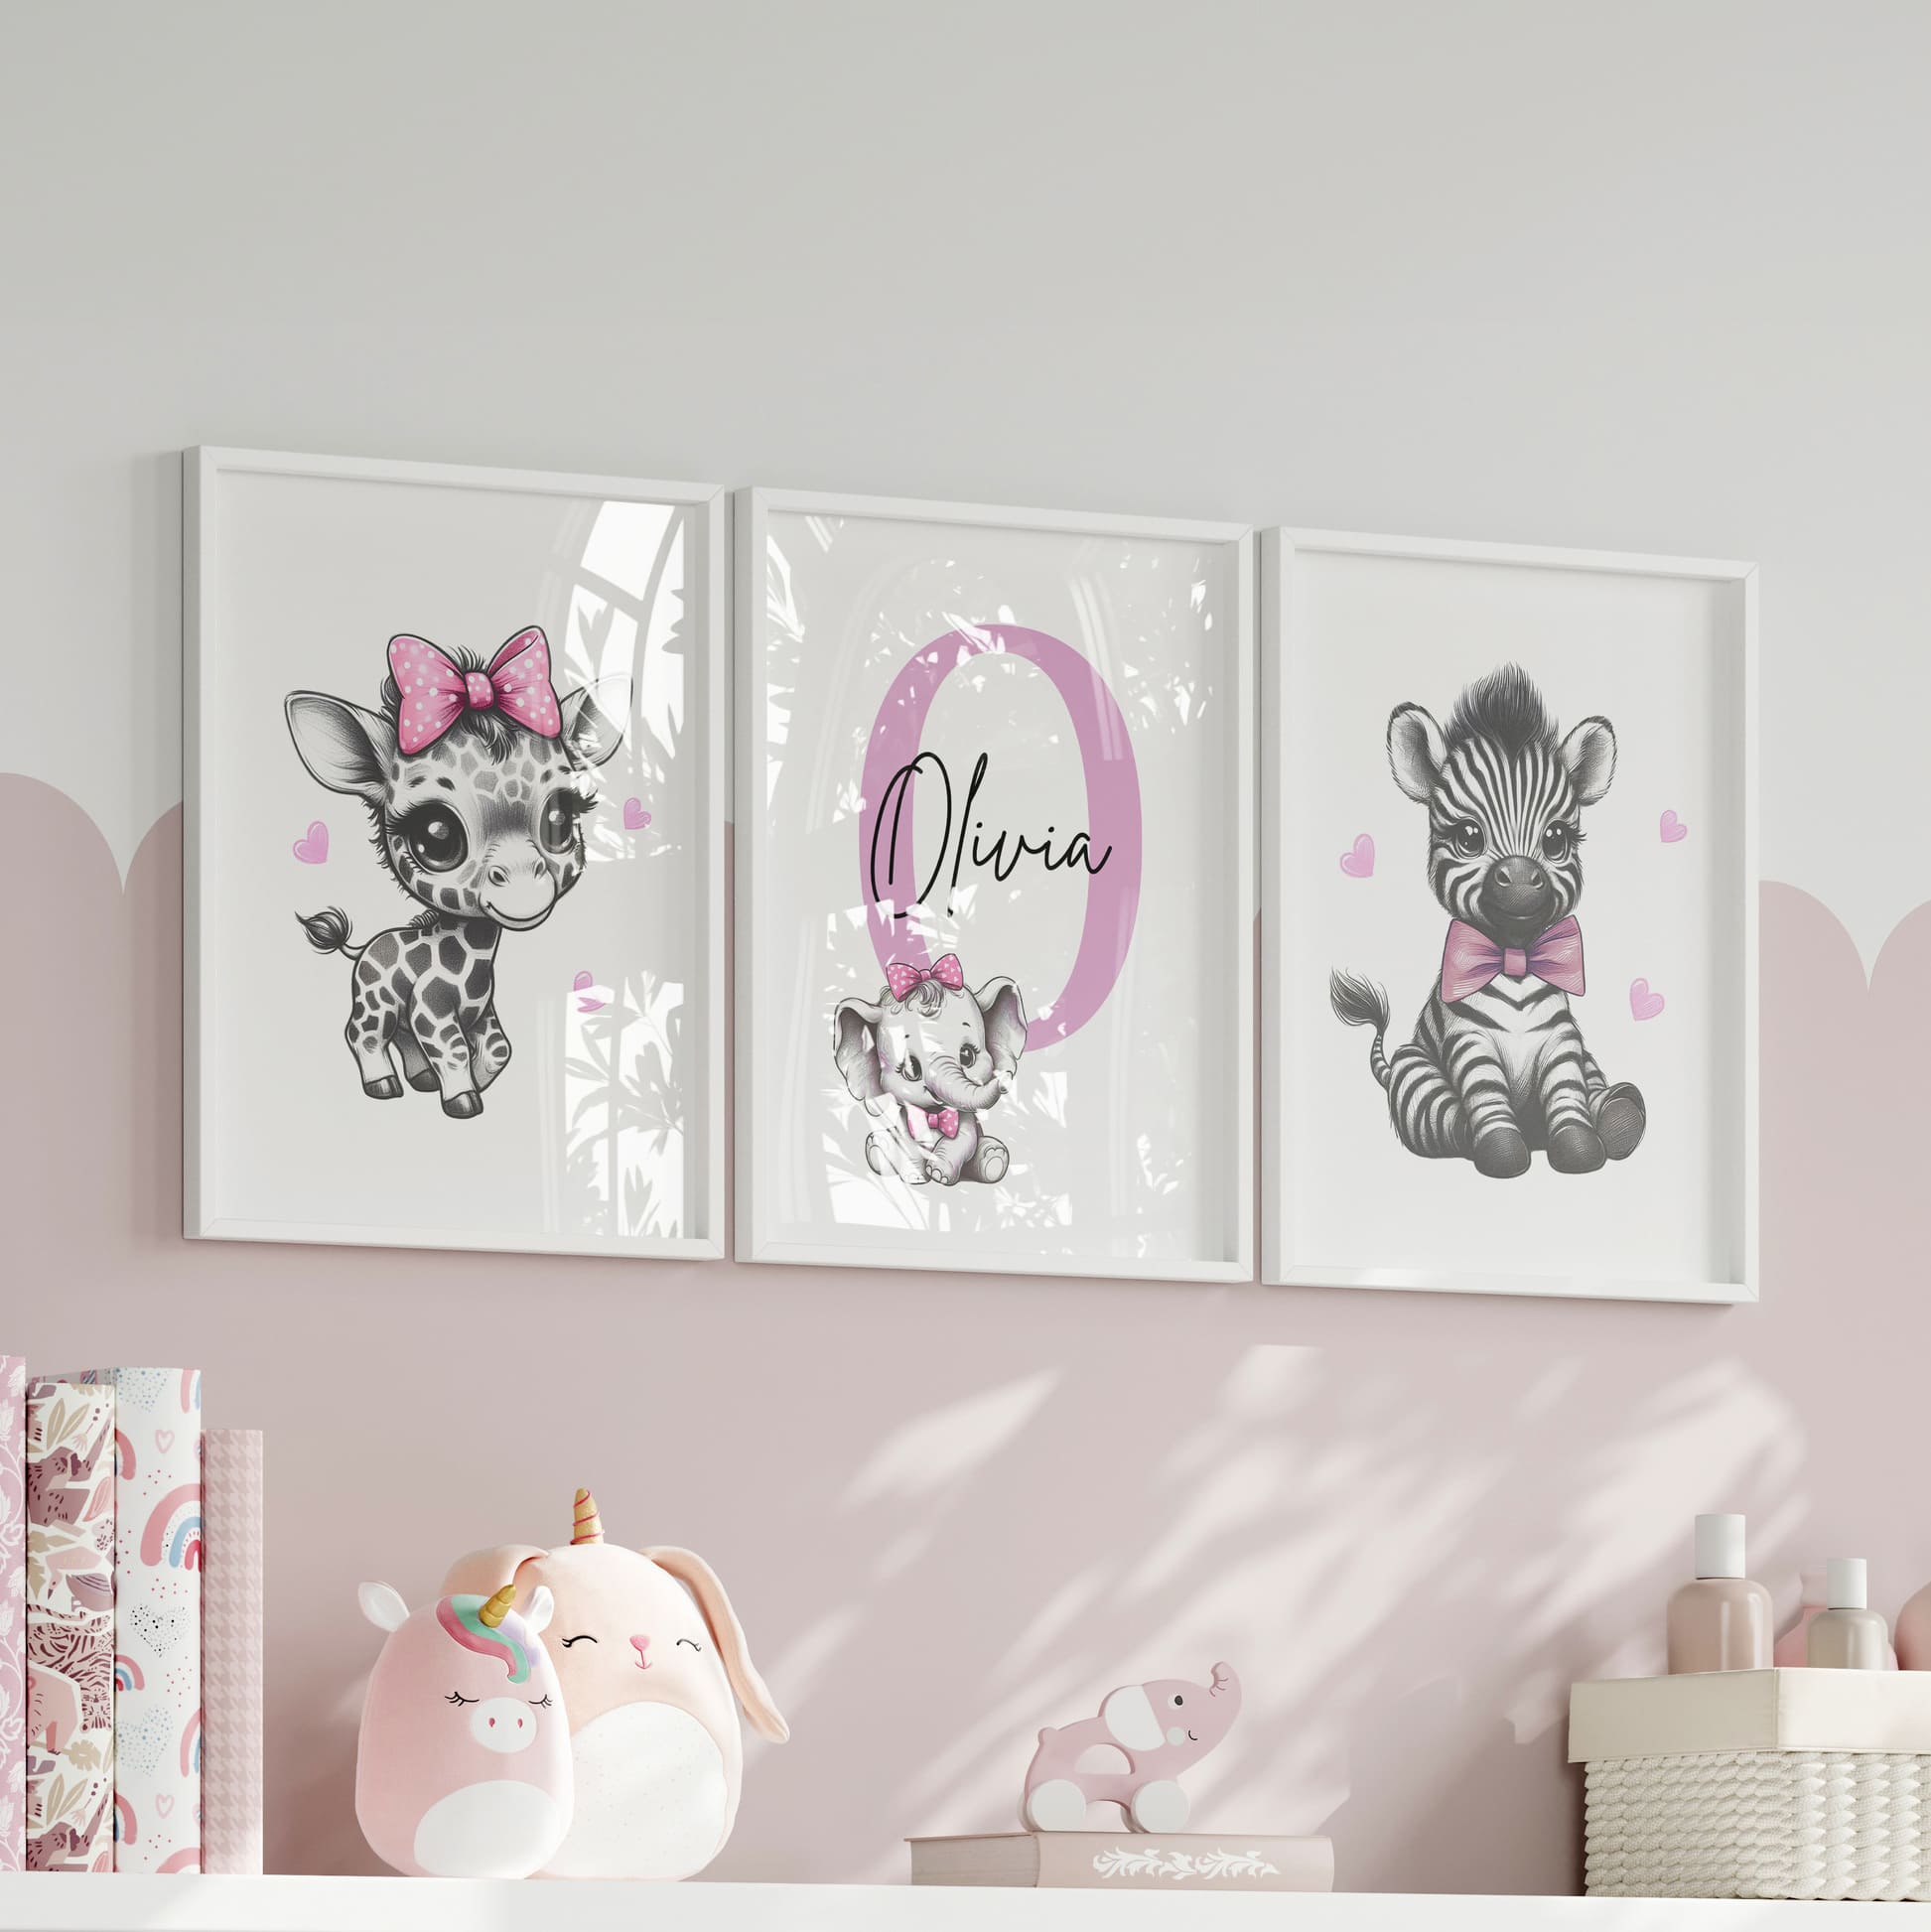 Set of three A4 prints in the style of pencil drawings. Each print features a cartoon baby giraffe, baby elephant, and baby zebra in black and white. They all wear a pink bow, with a few small pink hearts in the background. The middle image contains the elephant, which is smaller than the other two images. In the background, there is a large initial with a personalised name in black.